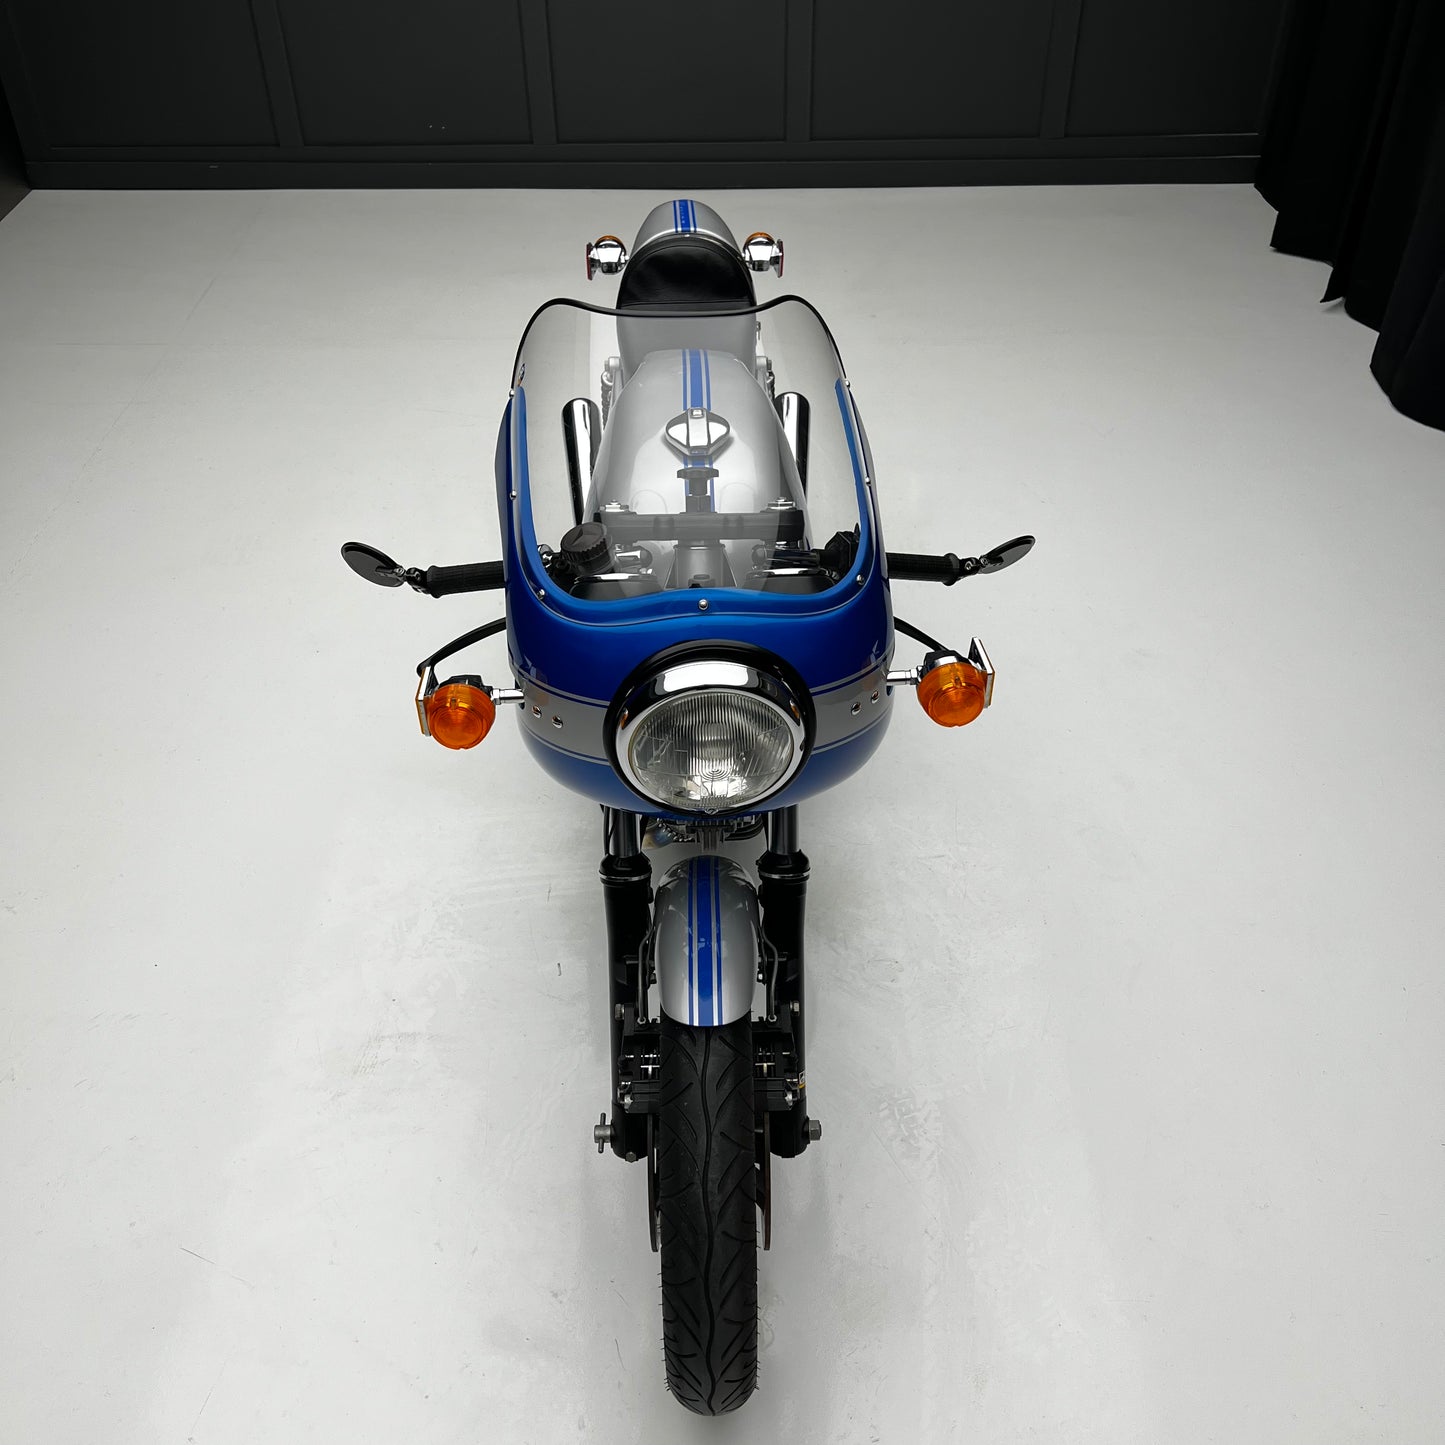 Load image into Gallery viewer, 1978 Ducati 900 Super Sport